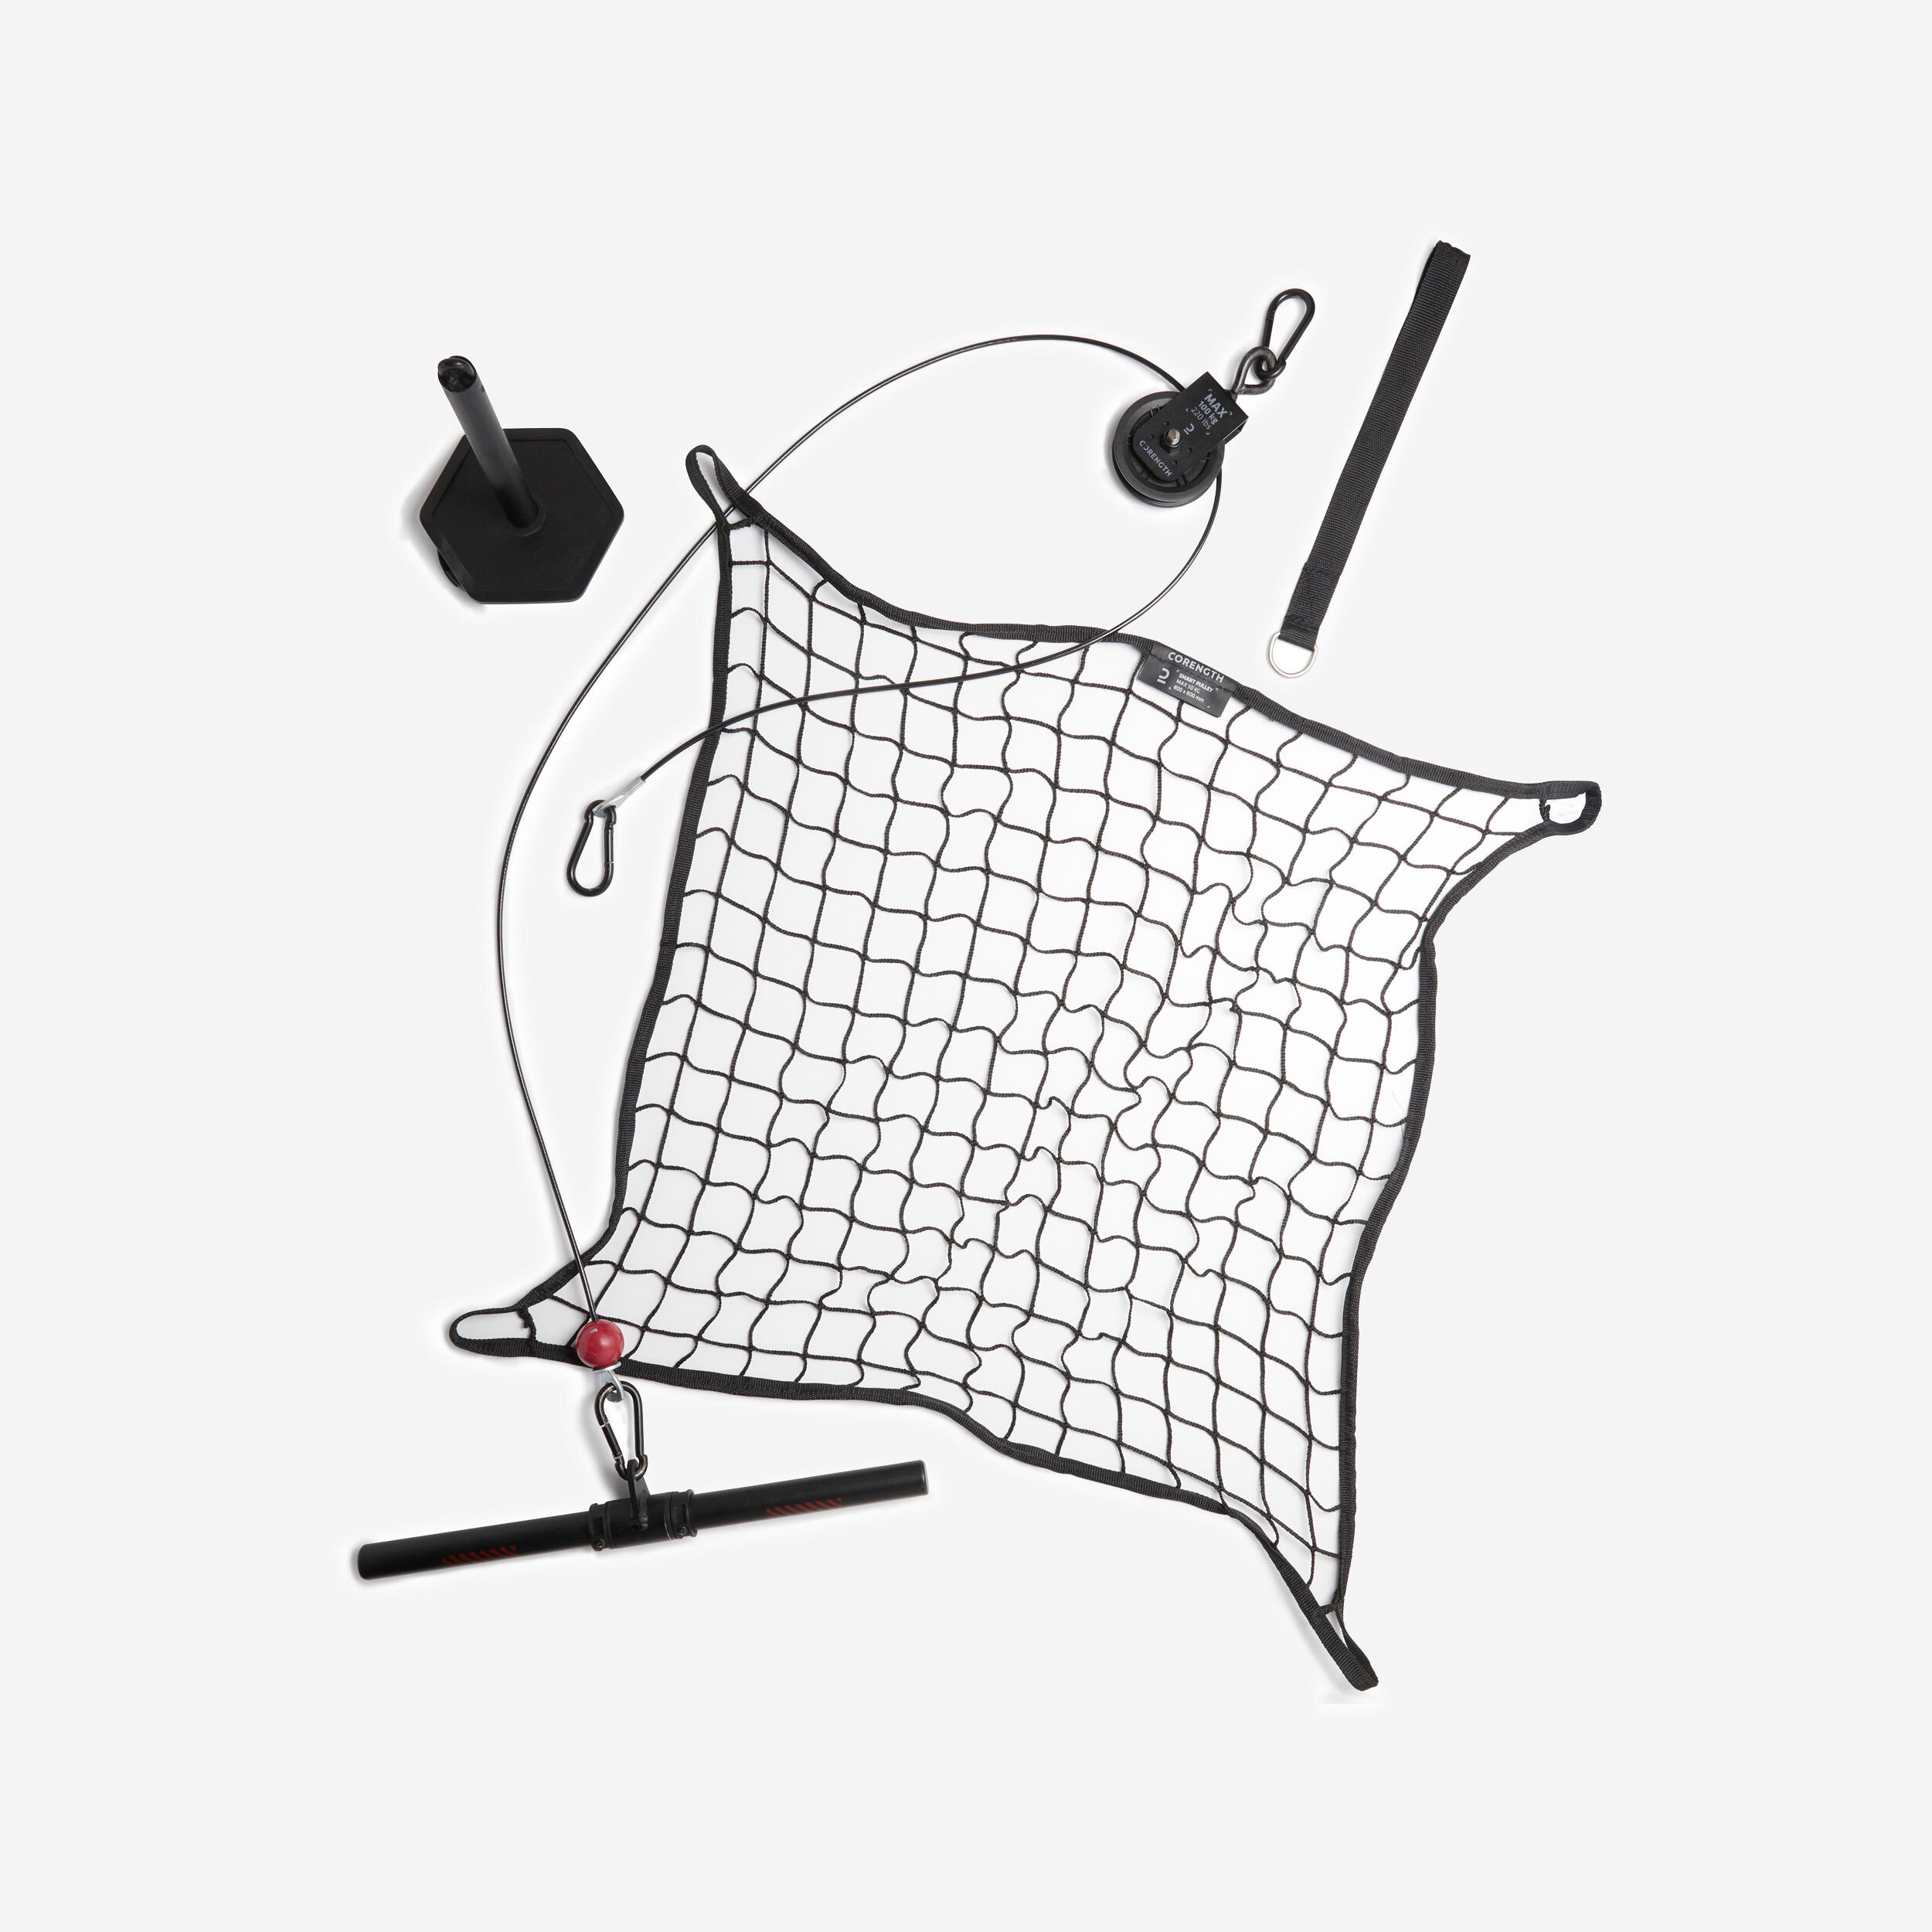 Weight Training Pulley Station With Pull Bar, Weights Holder and Net 1/8